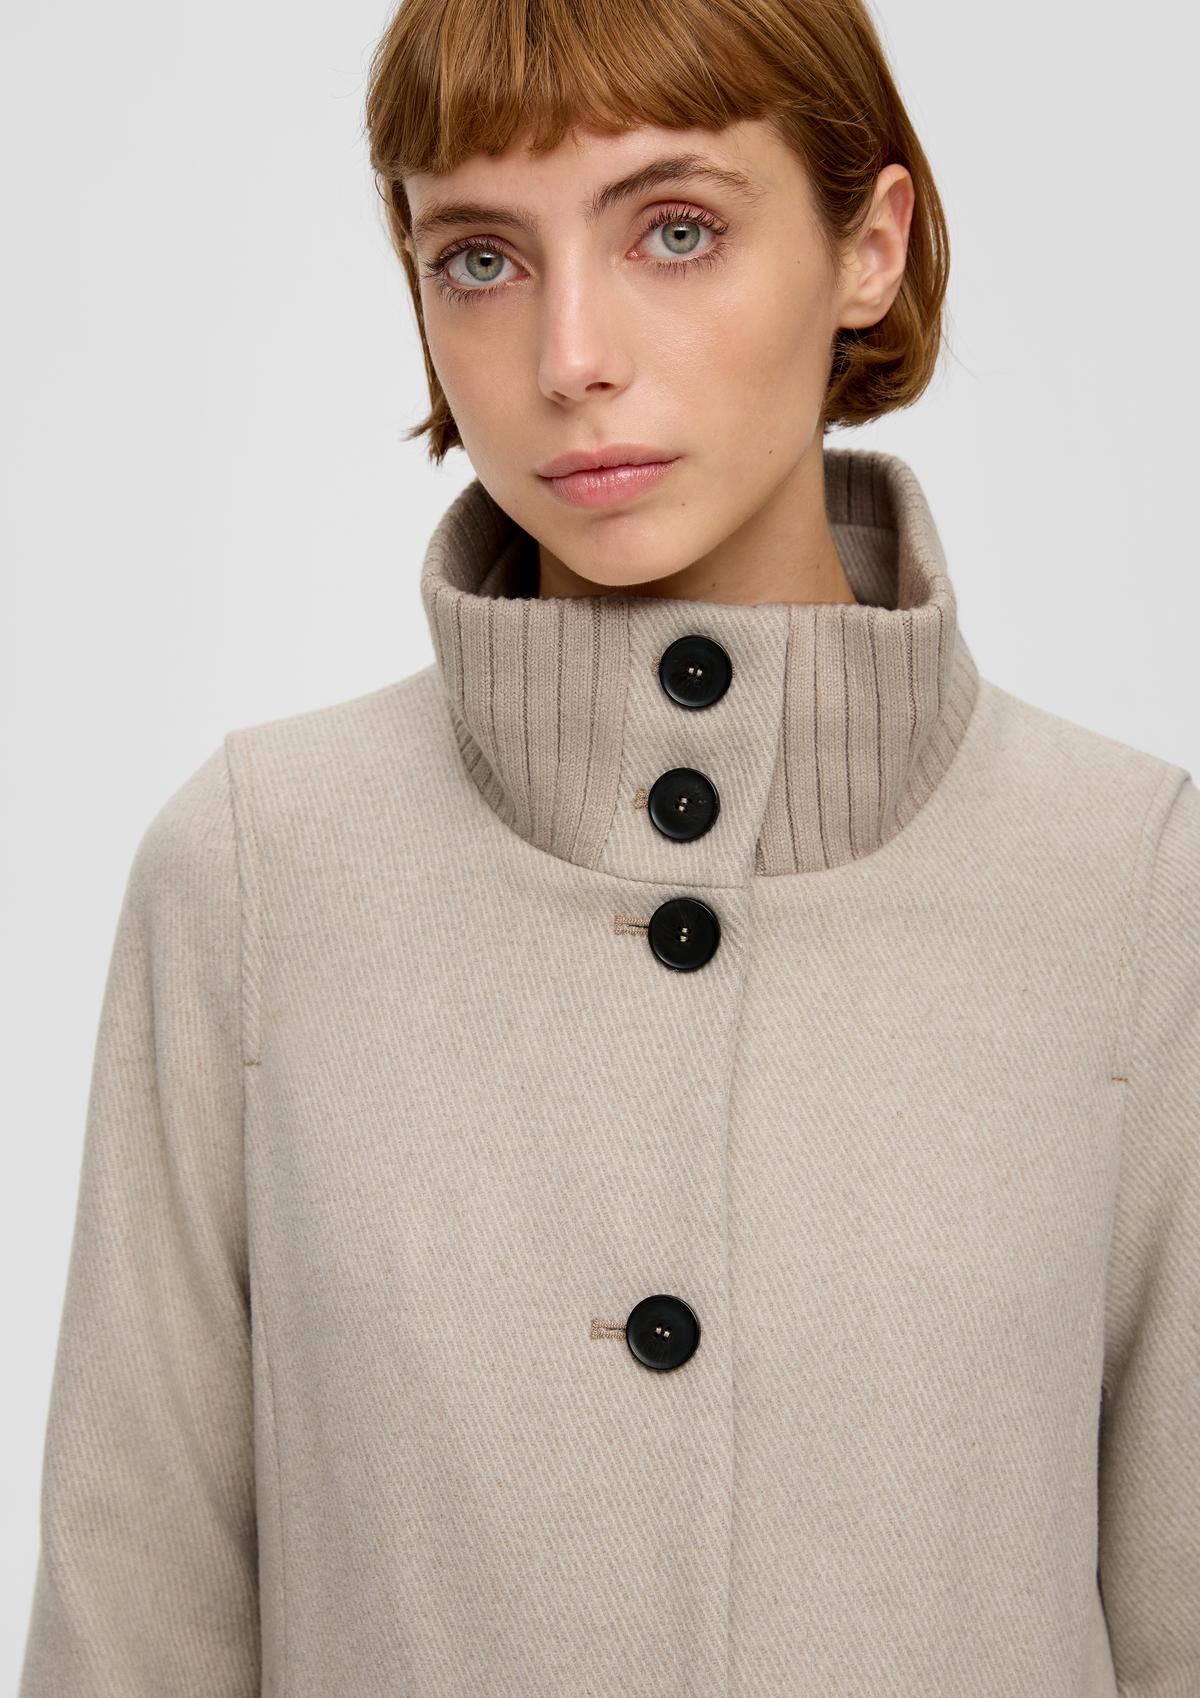 s.Oliver Coat with a twill texture